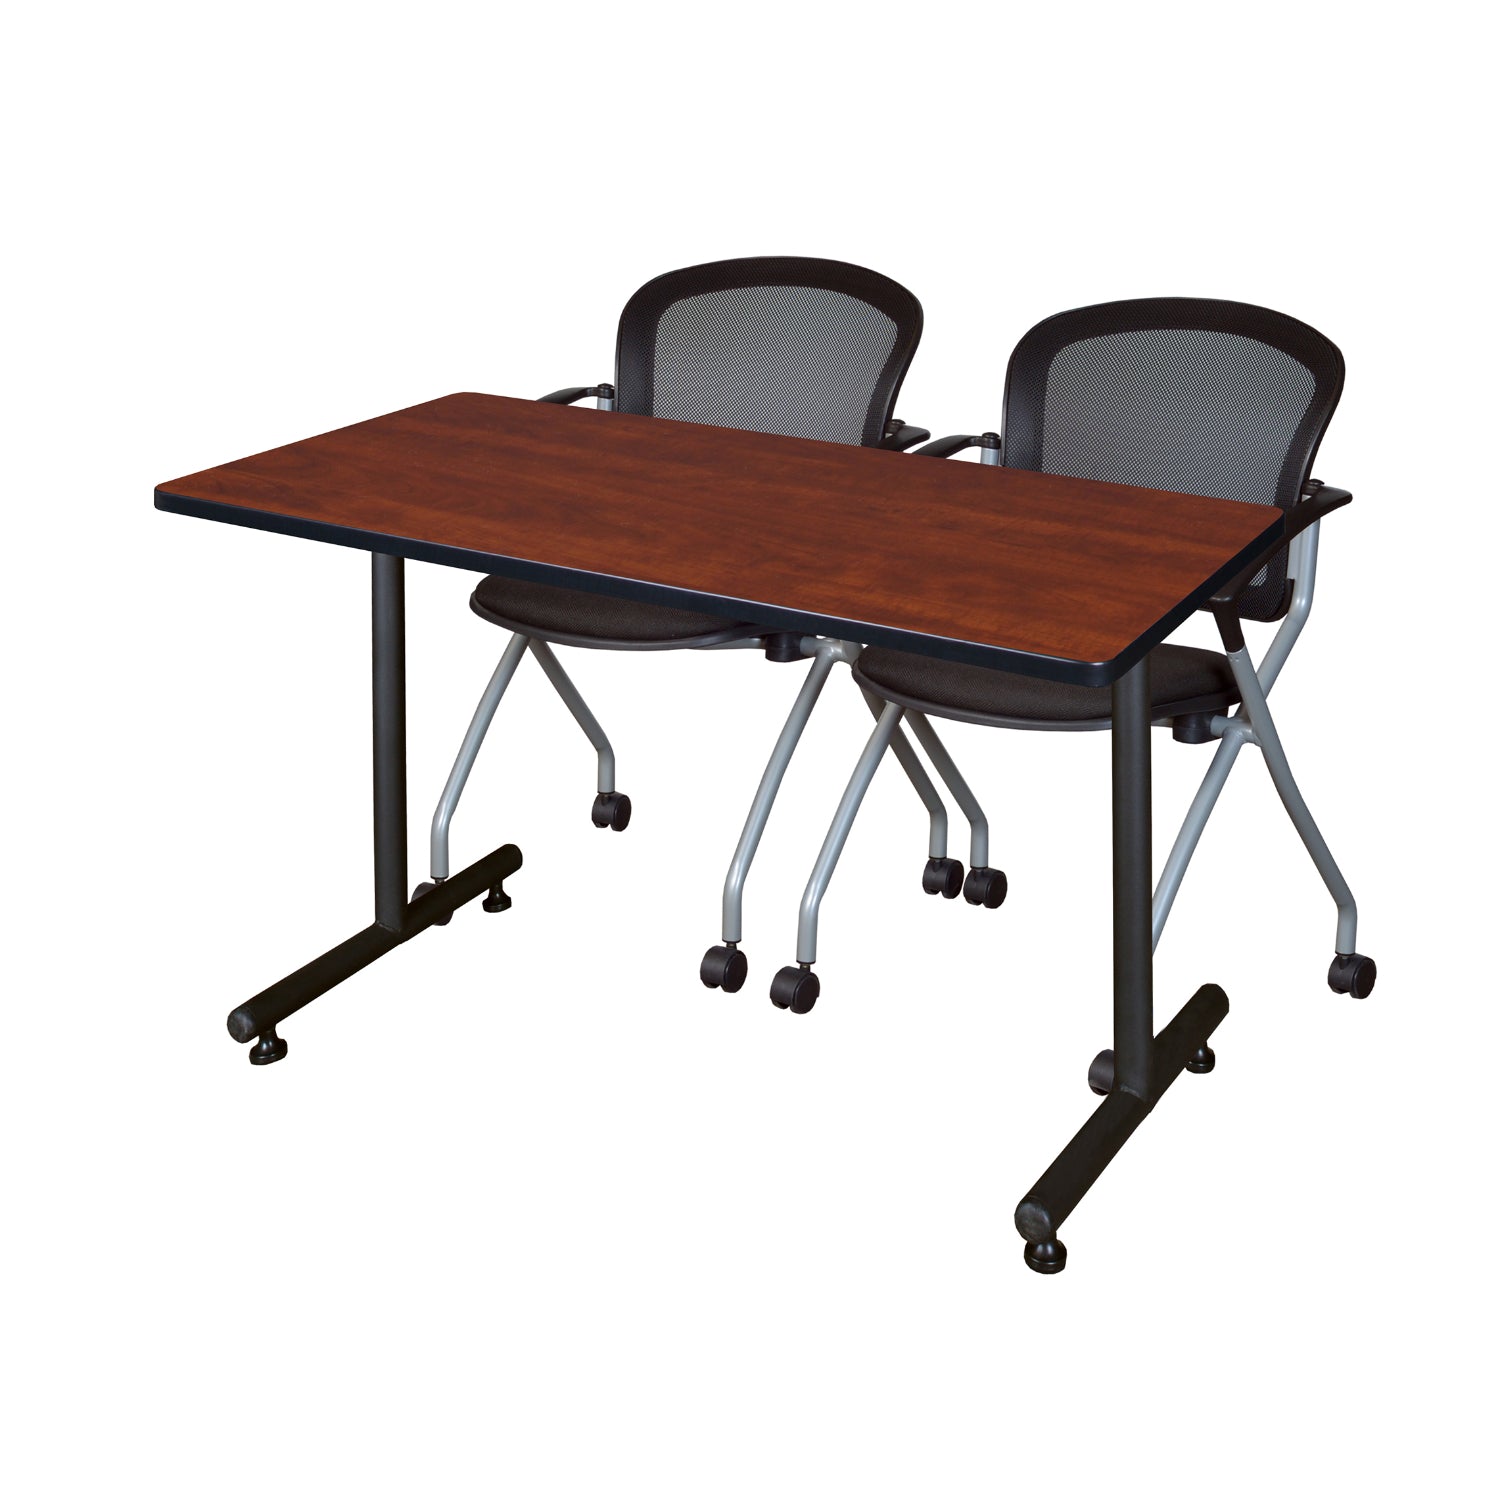 Kobe Training Table and Chair Package, Kobe 48" x 30" T-Base Training/Seminar Table with 2 Cadence Nesting Chairs